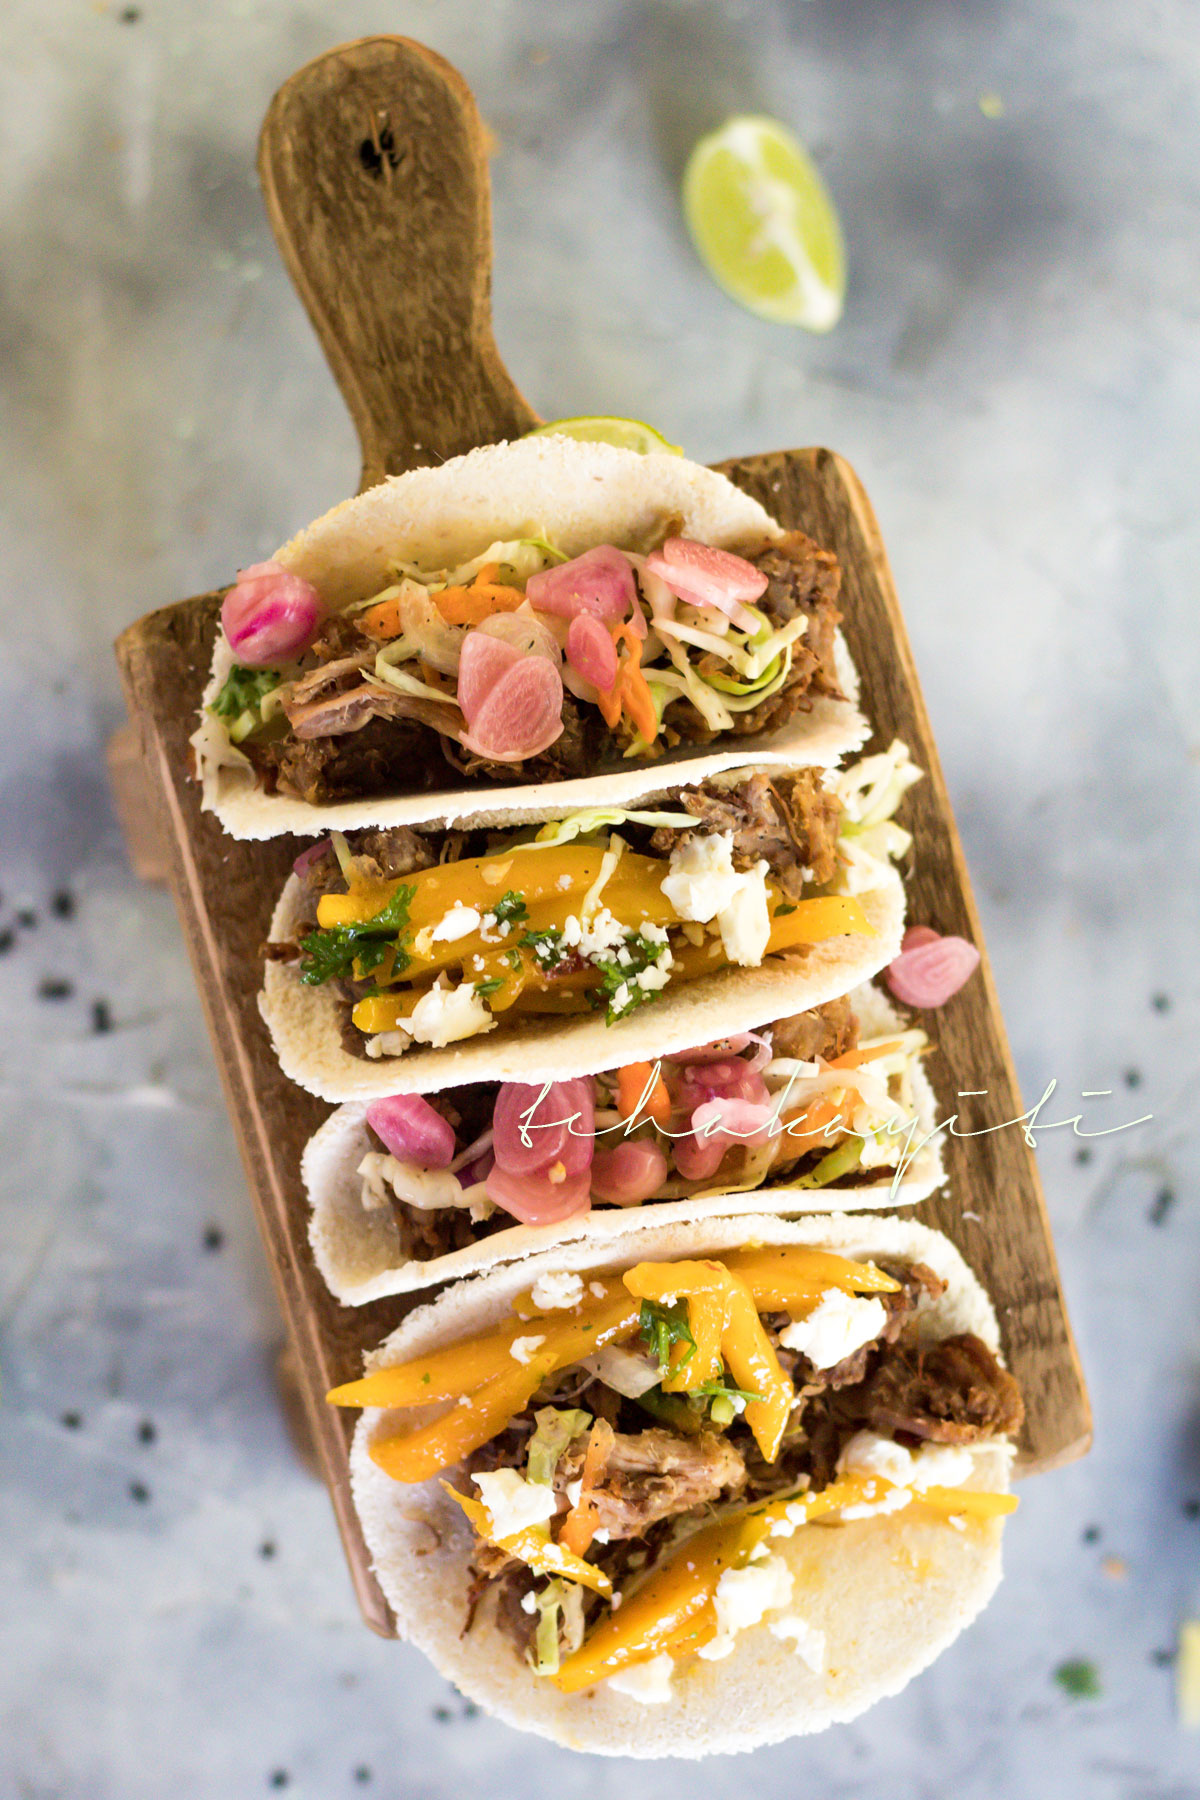 These tacos are made better with our spicy mango salsa. | tchakayiti.com